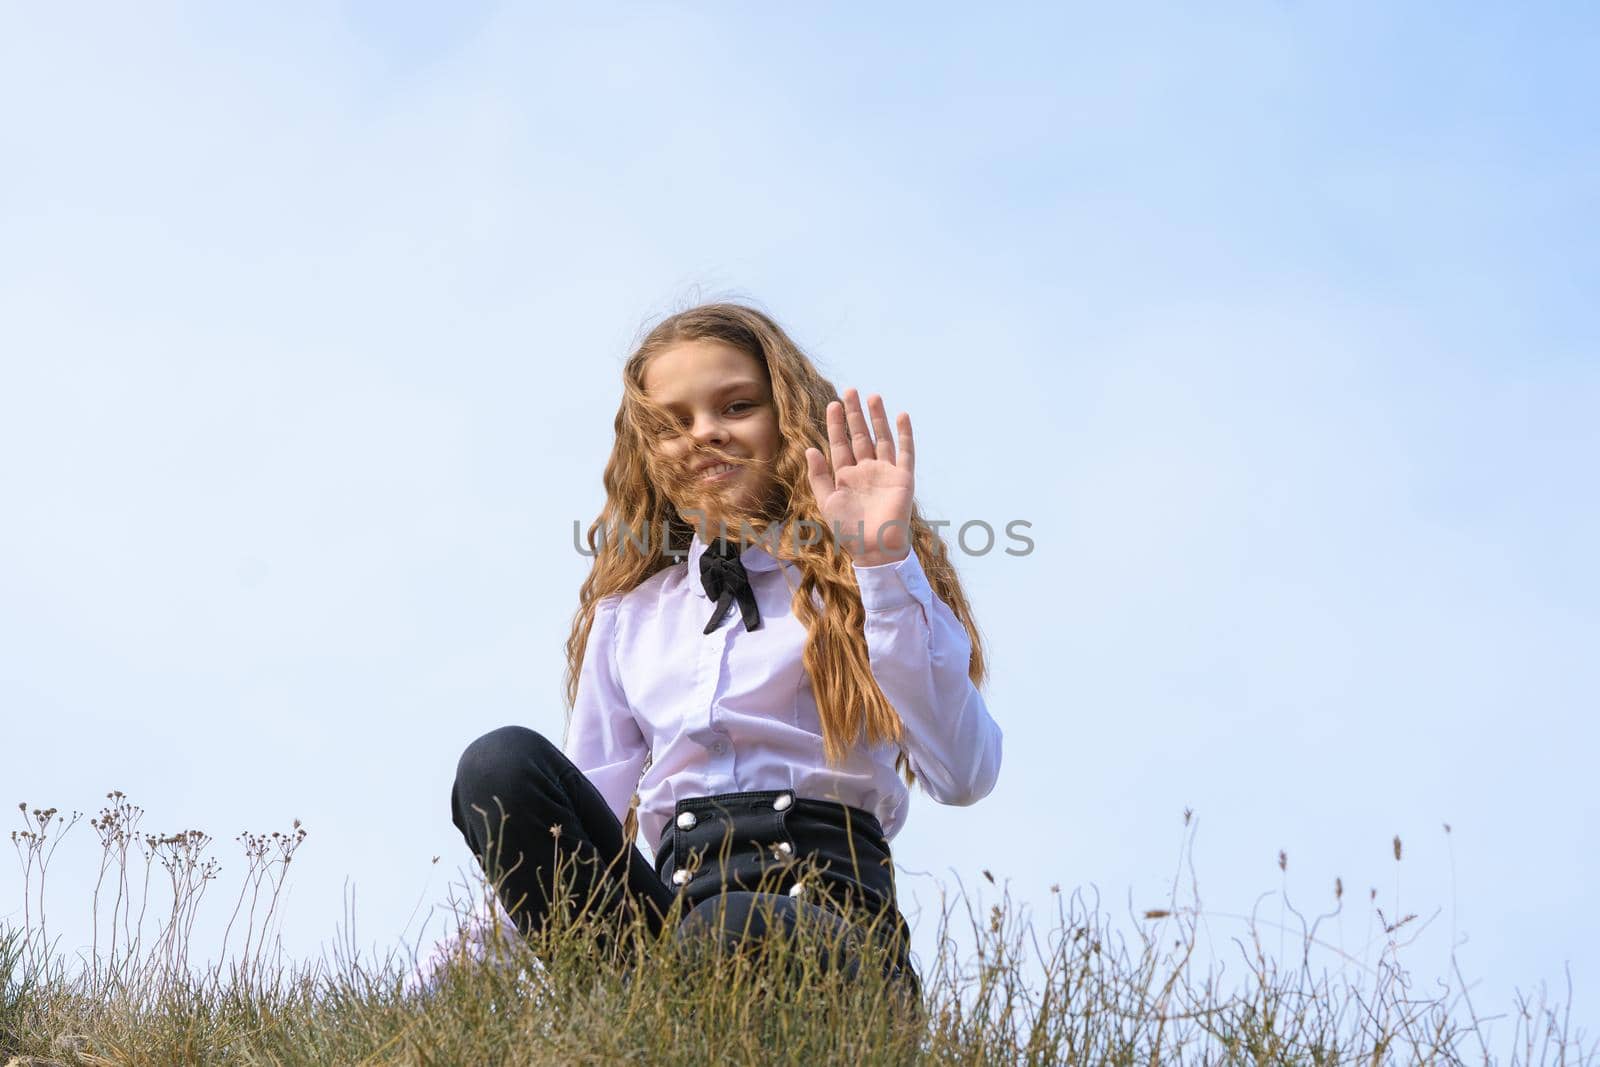 A girl in a white shirt with a bow tie sits on the ground in a field against the background of the sky and waves a pen to the frame